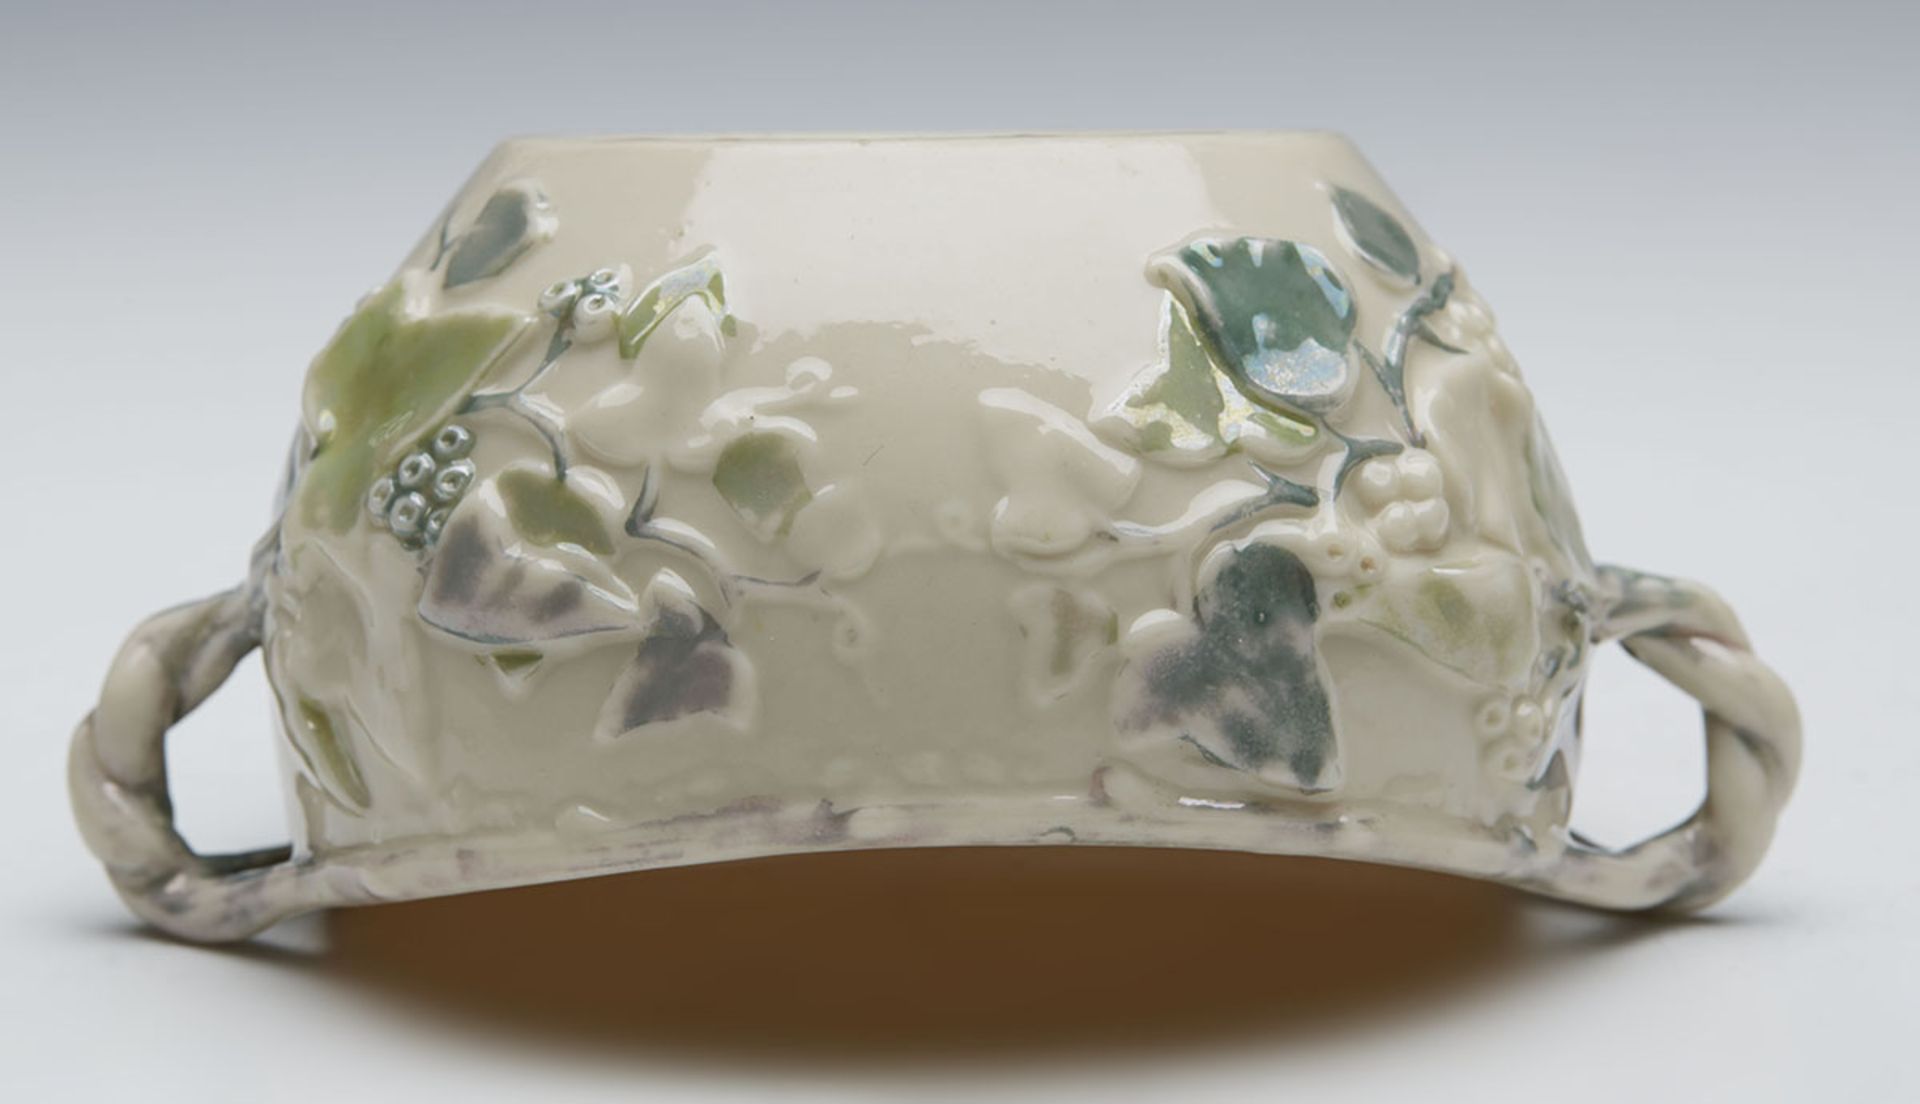 ANTIQUE BELLEEK 2ND PERIOD LUSTRE GLAZED BOWL 1891-1926   DIMENSIONS   Height 5,5cm, Width 12, - Image 7 of 7